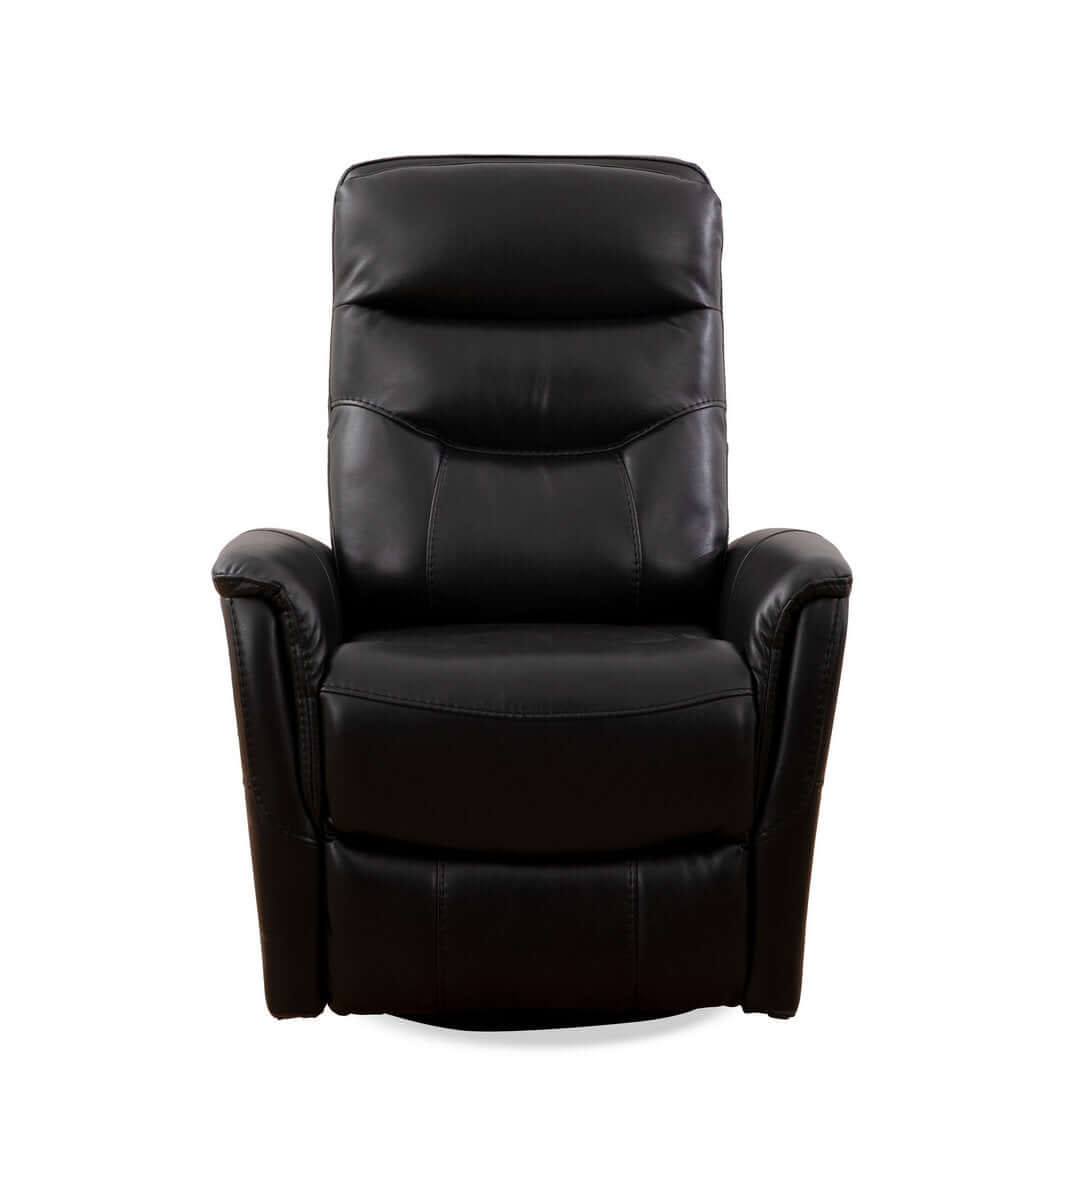 International Furniture Distribution Centre - Black PU Swivel Power Recliner Chair with Solid Hardwood Frame - IF 6300